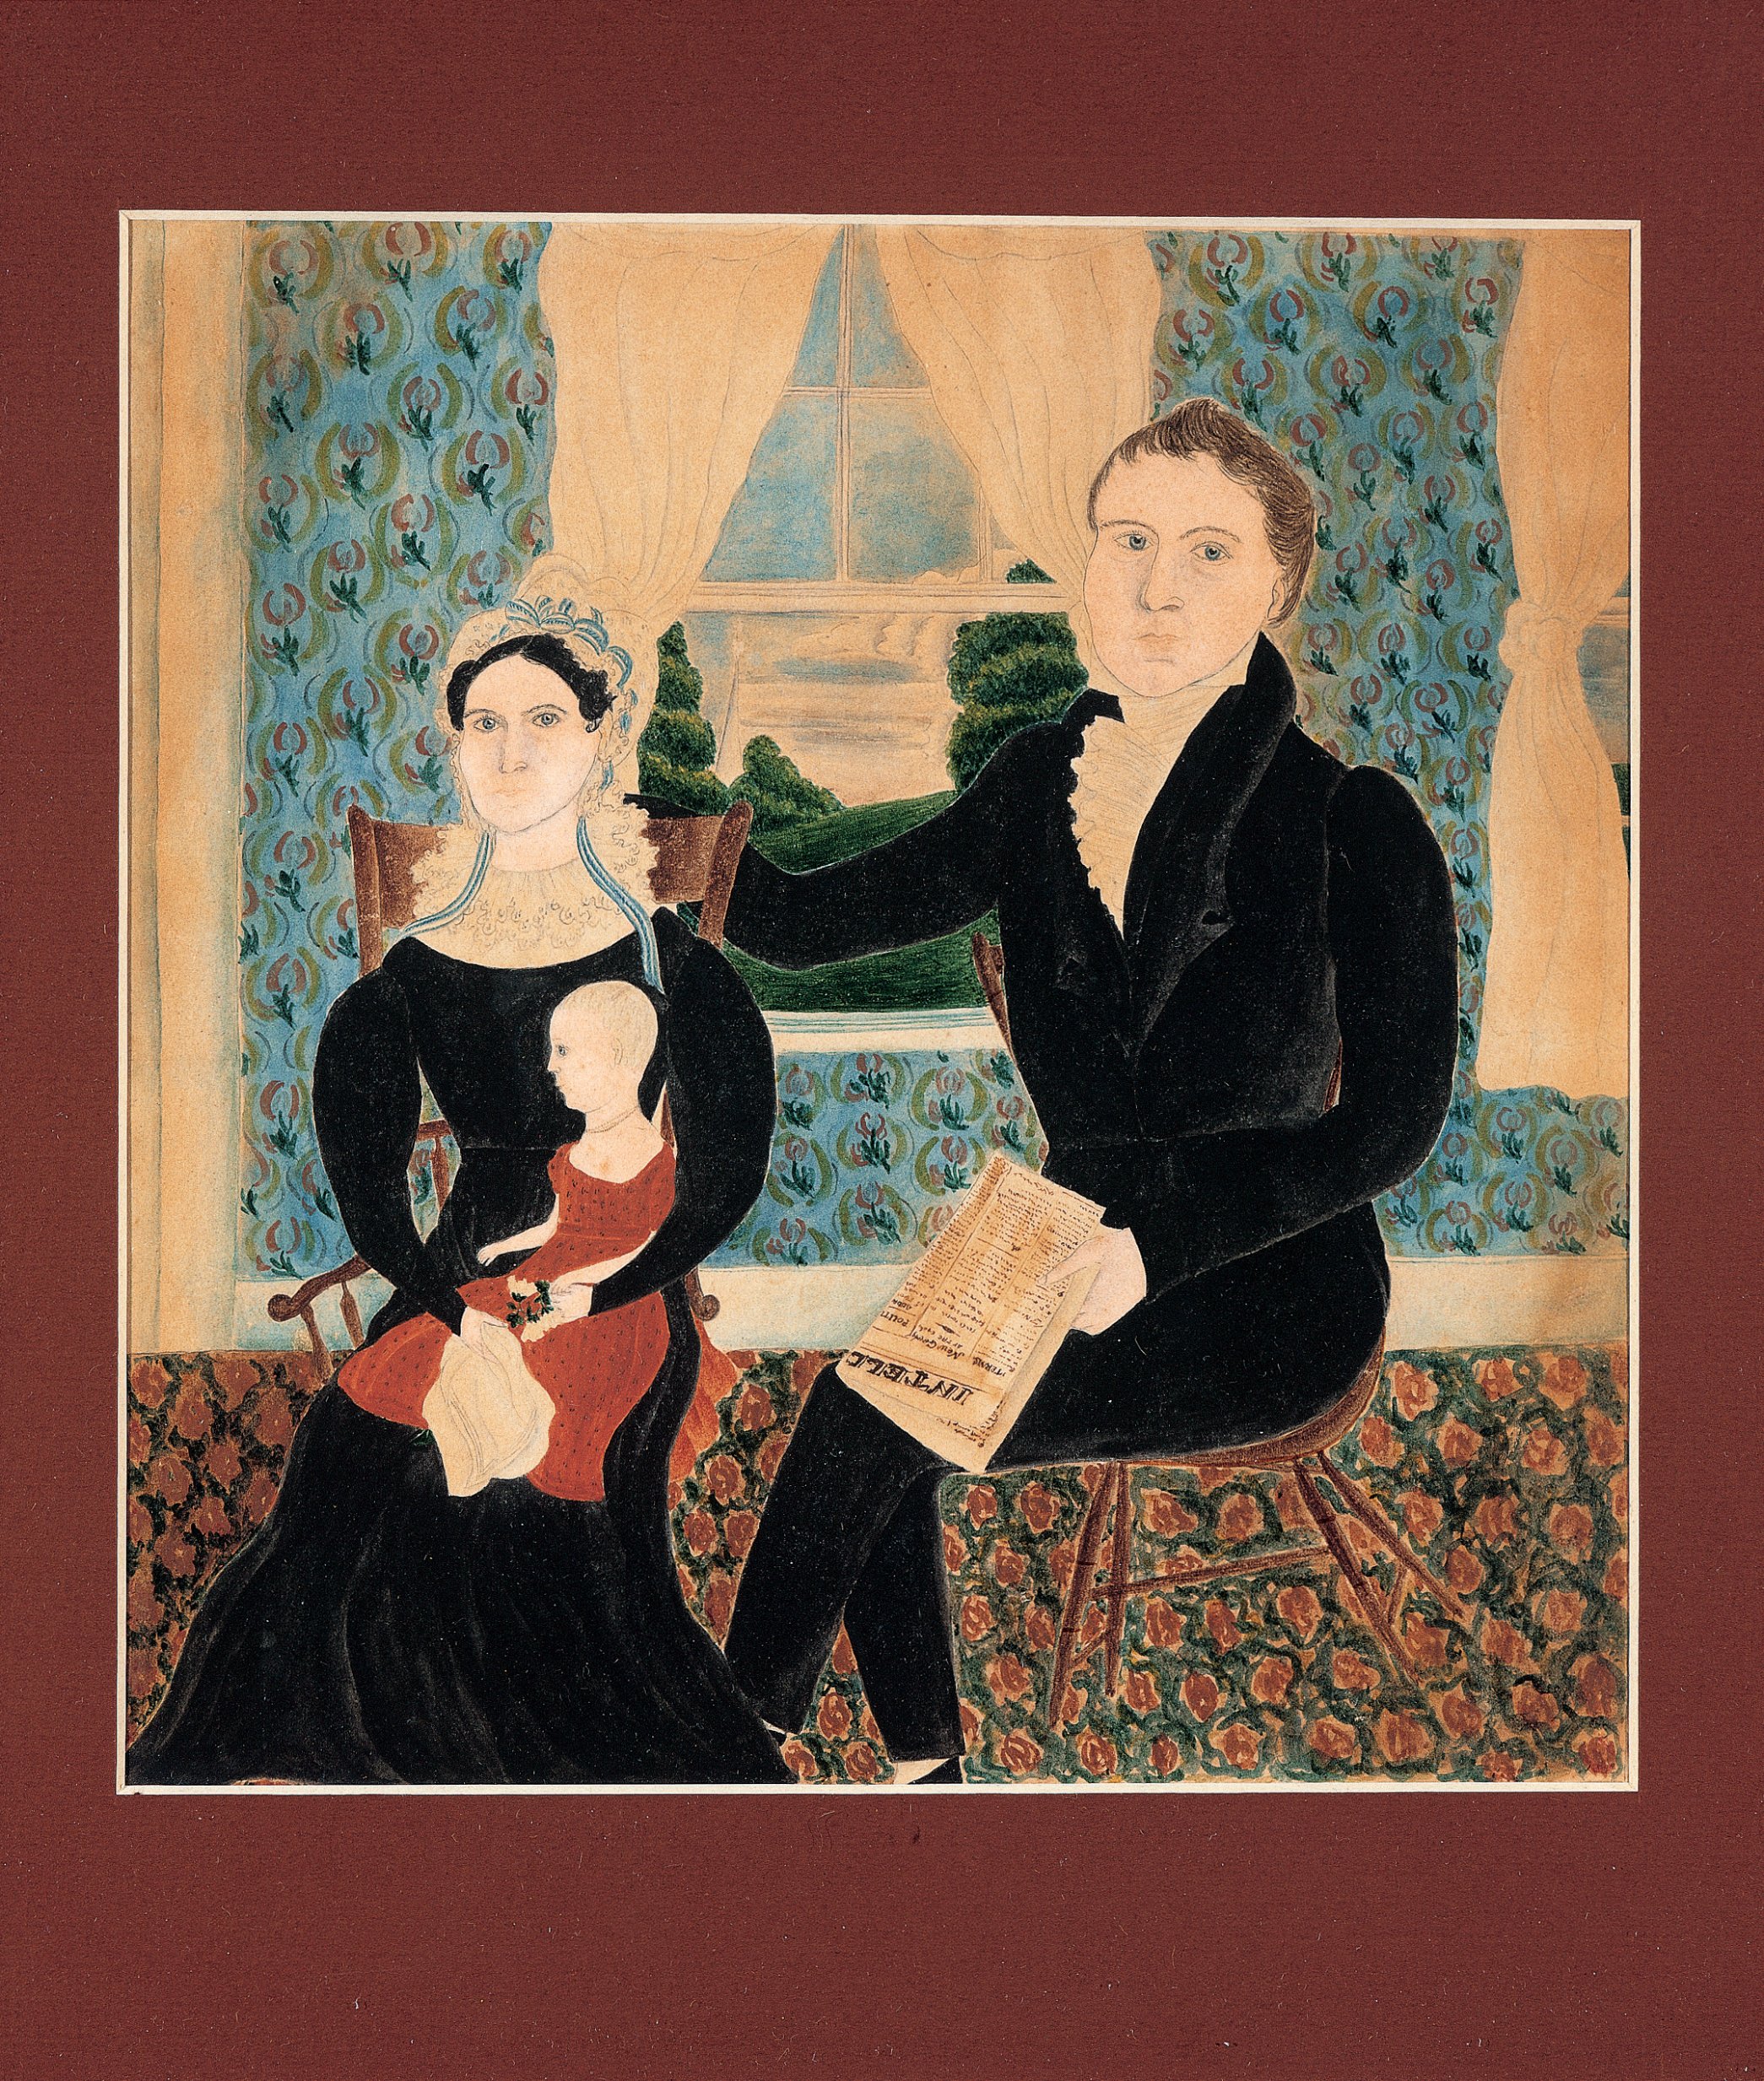  Deborah Goldsmith (1808–1836),  Mr. and Mrs. Lyman Day and Daughter Cornelia , c. 1823–1824, watercolor and pencil on paper, 9 x 8 3/4 inches.&nbsp;Collection American Folk Art Museum, New York. Gift of Ralph Esmerian, 2013.1.9. Photo courtesy Sothe